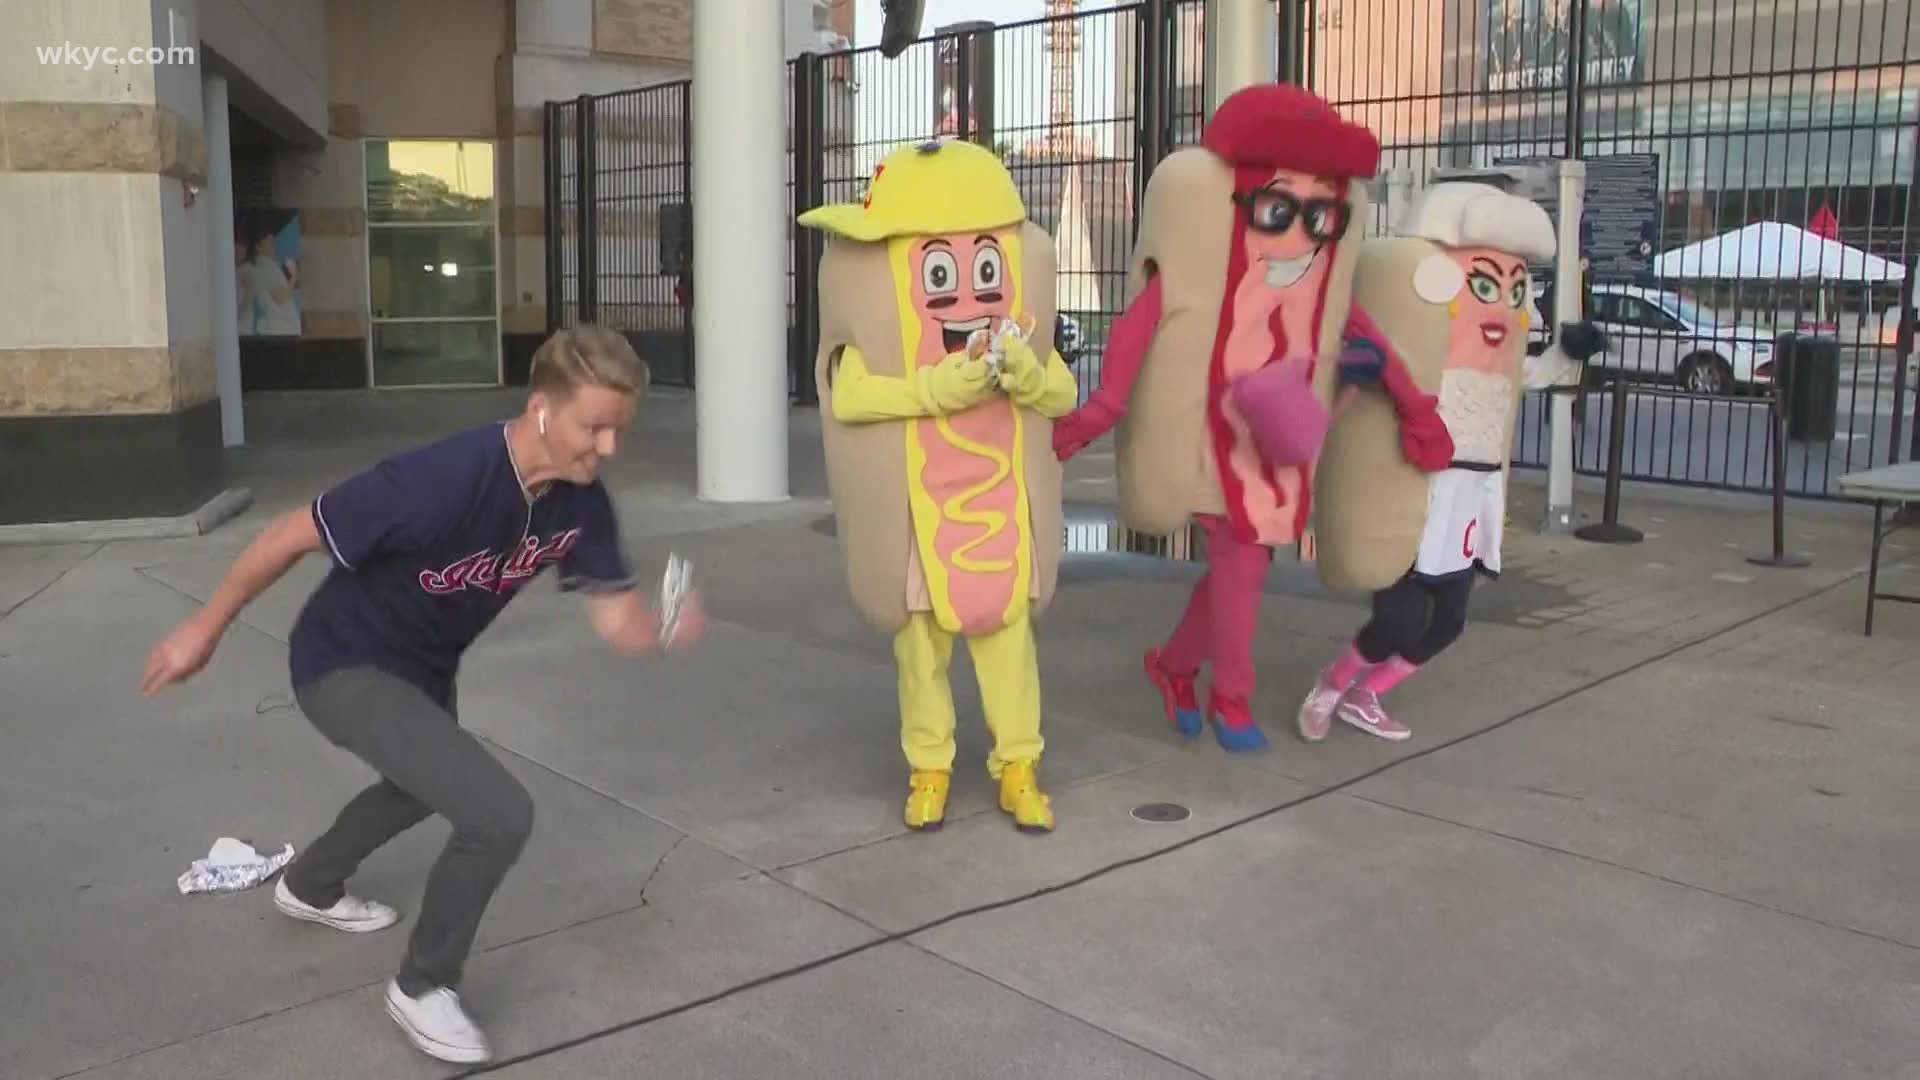 On your mark... Get set... Go! Watch as 3News' Austin Love races the legendary Cleveland Indians' hot dogs at Progressive Field.